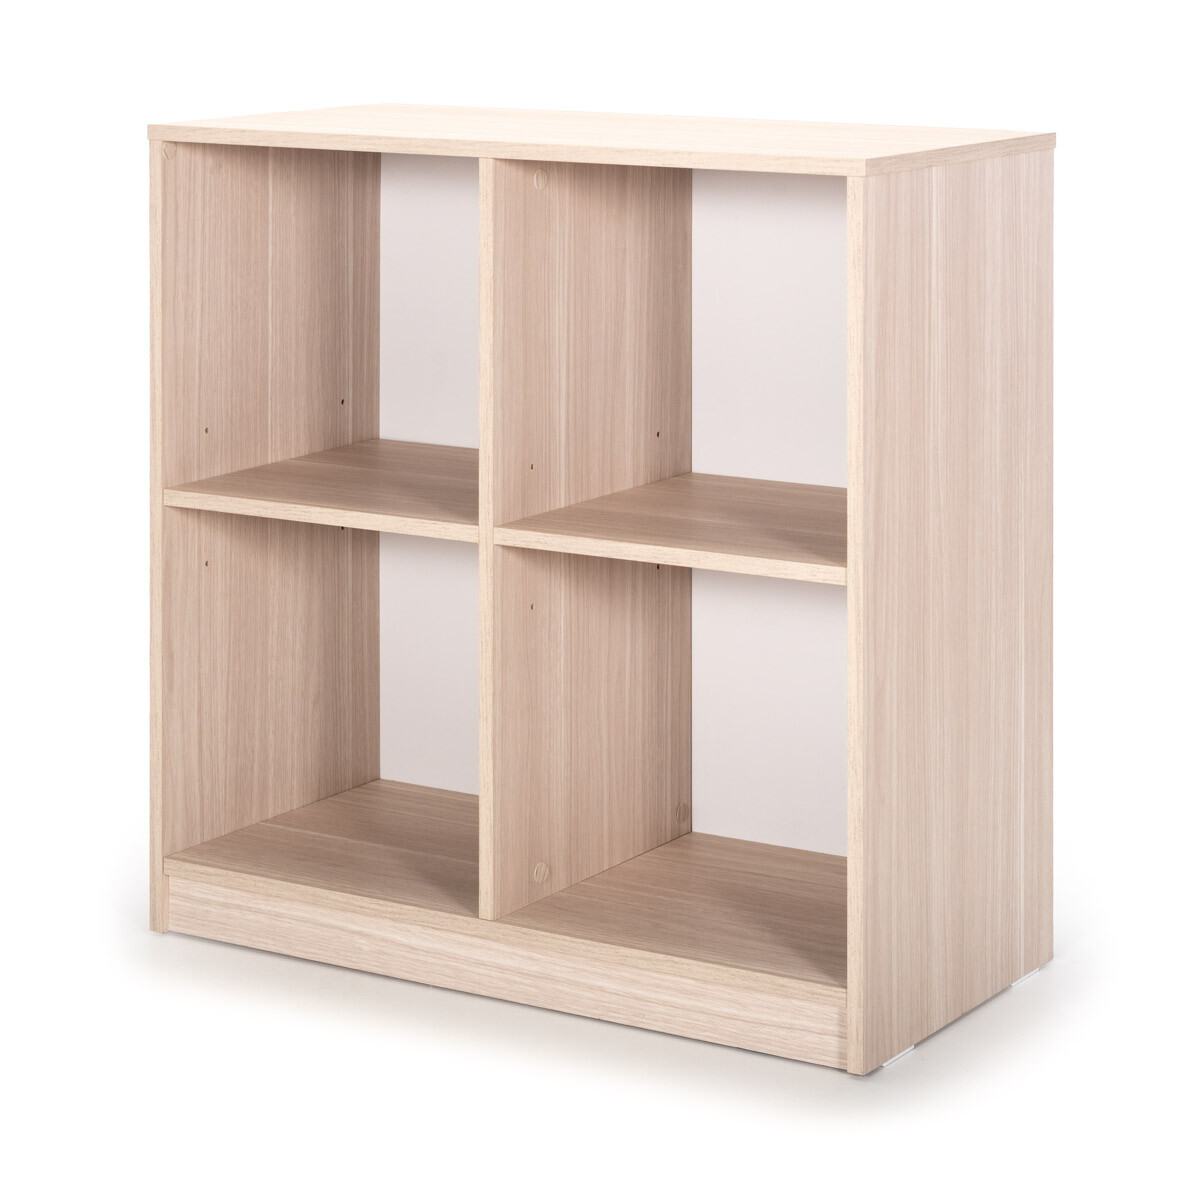 Biblioteca Start Up Baja (outlet) - Roble Claro y Off white 